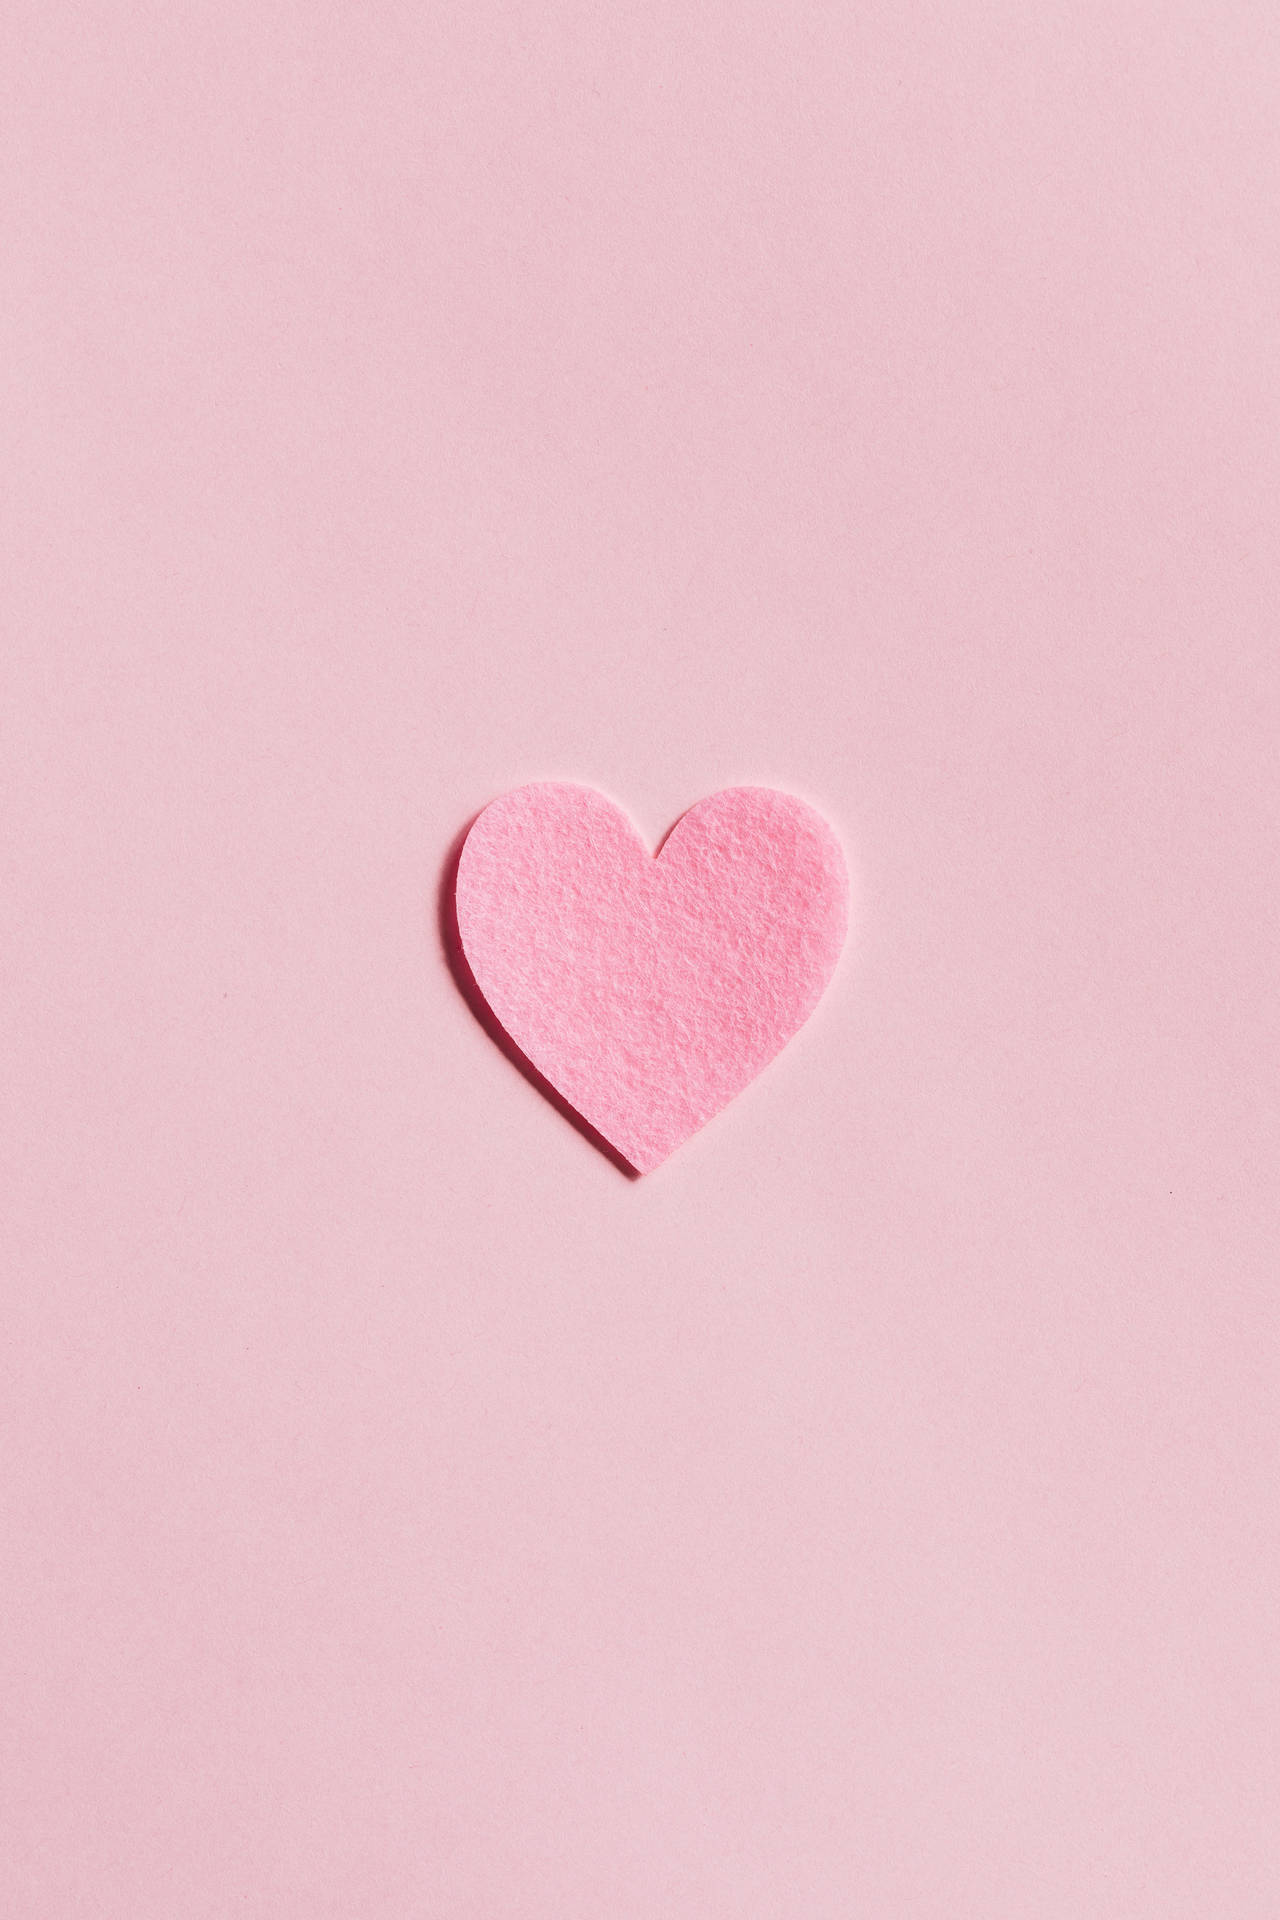 Paper Heart Plain Pink Background